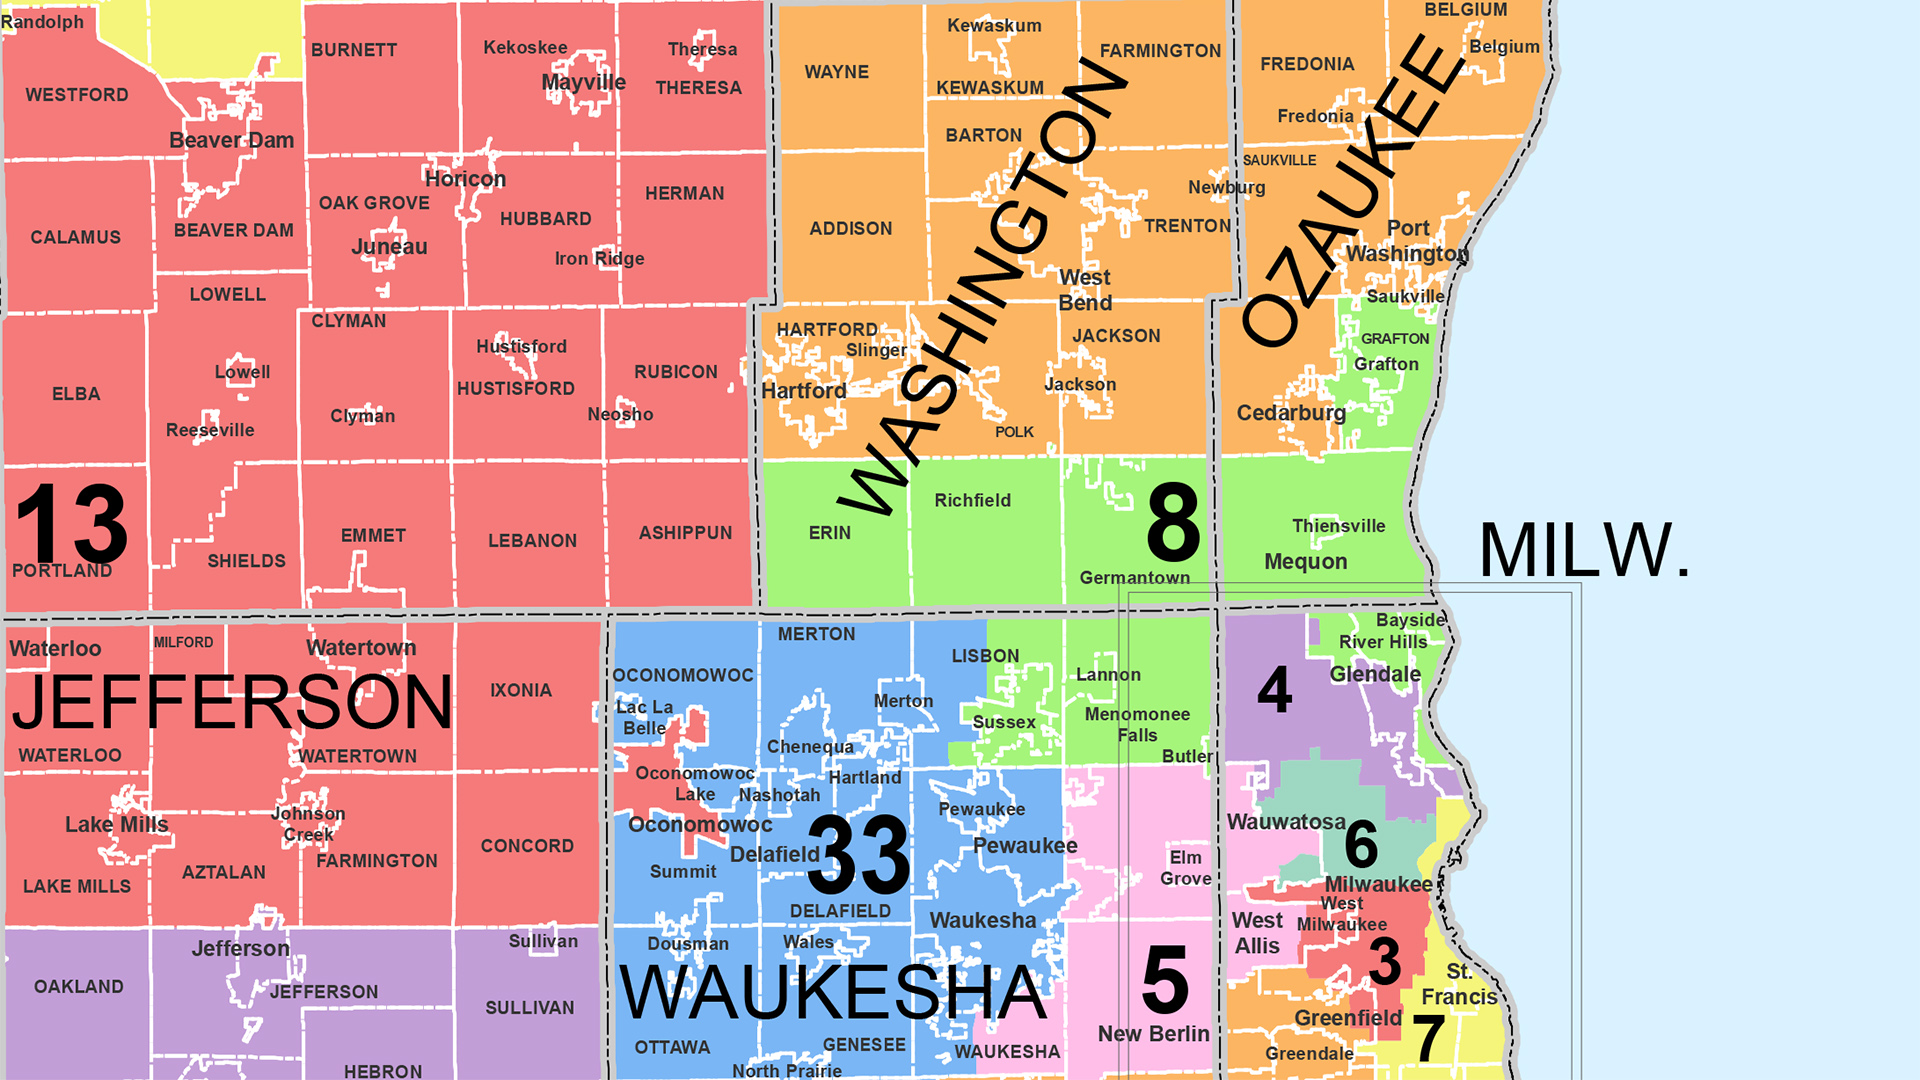 Lawsuit to challenge Wisconsin’s legislative maps to be filed